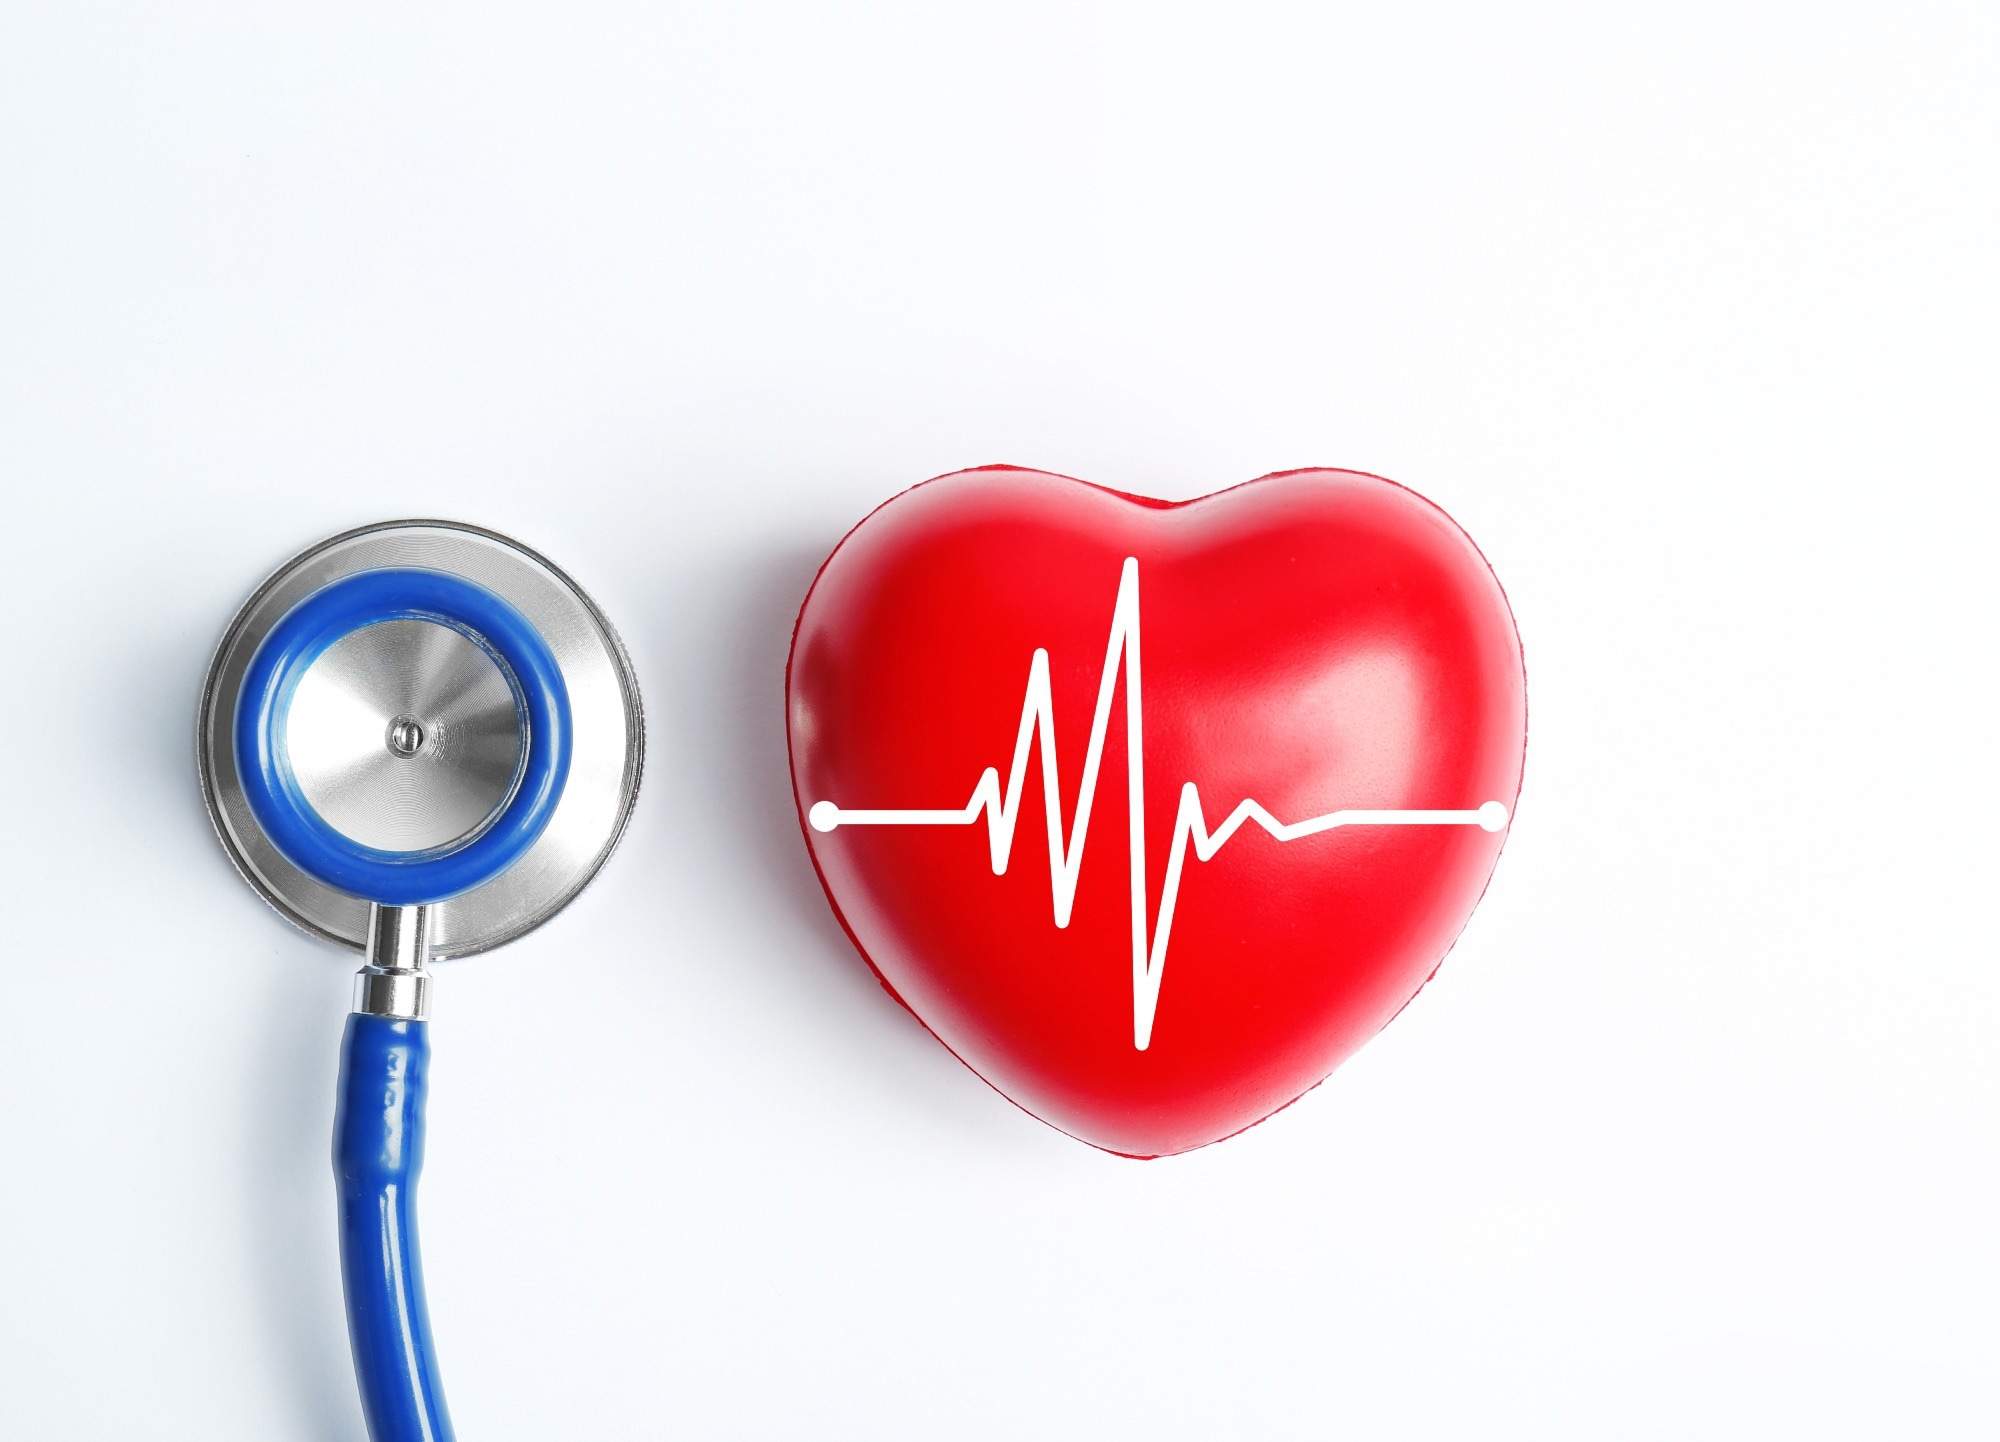 Study: Cross-sectional associations between short and mid-term blood pressure variability, cognition, and vascular stiffness in older adults. Image Credit: New Africa / Shutterstock